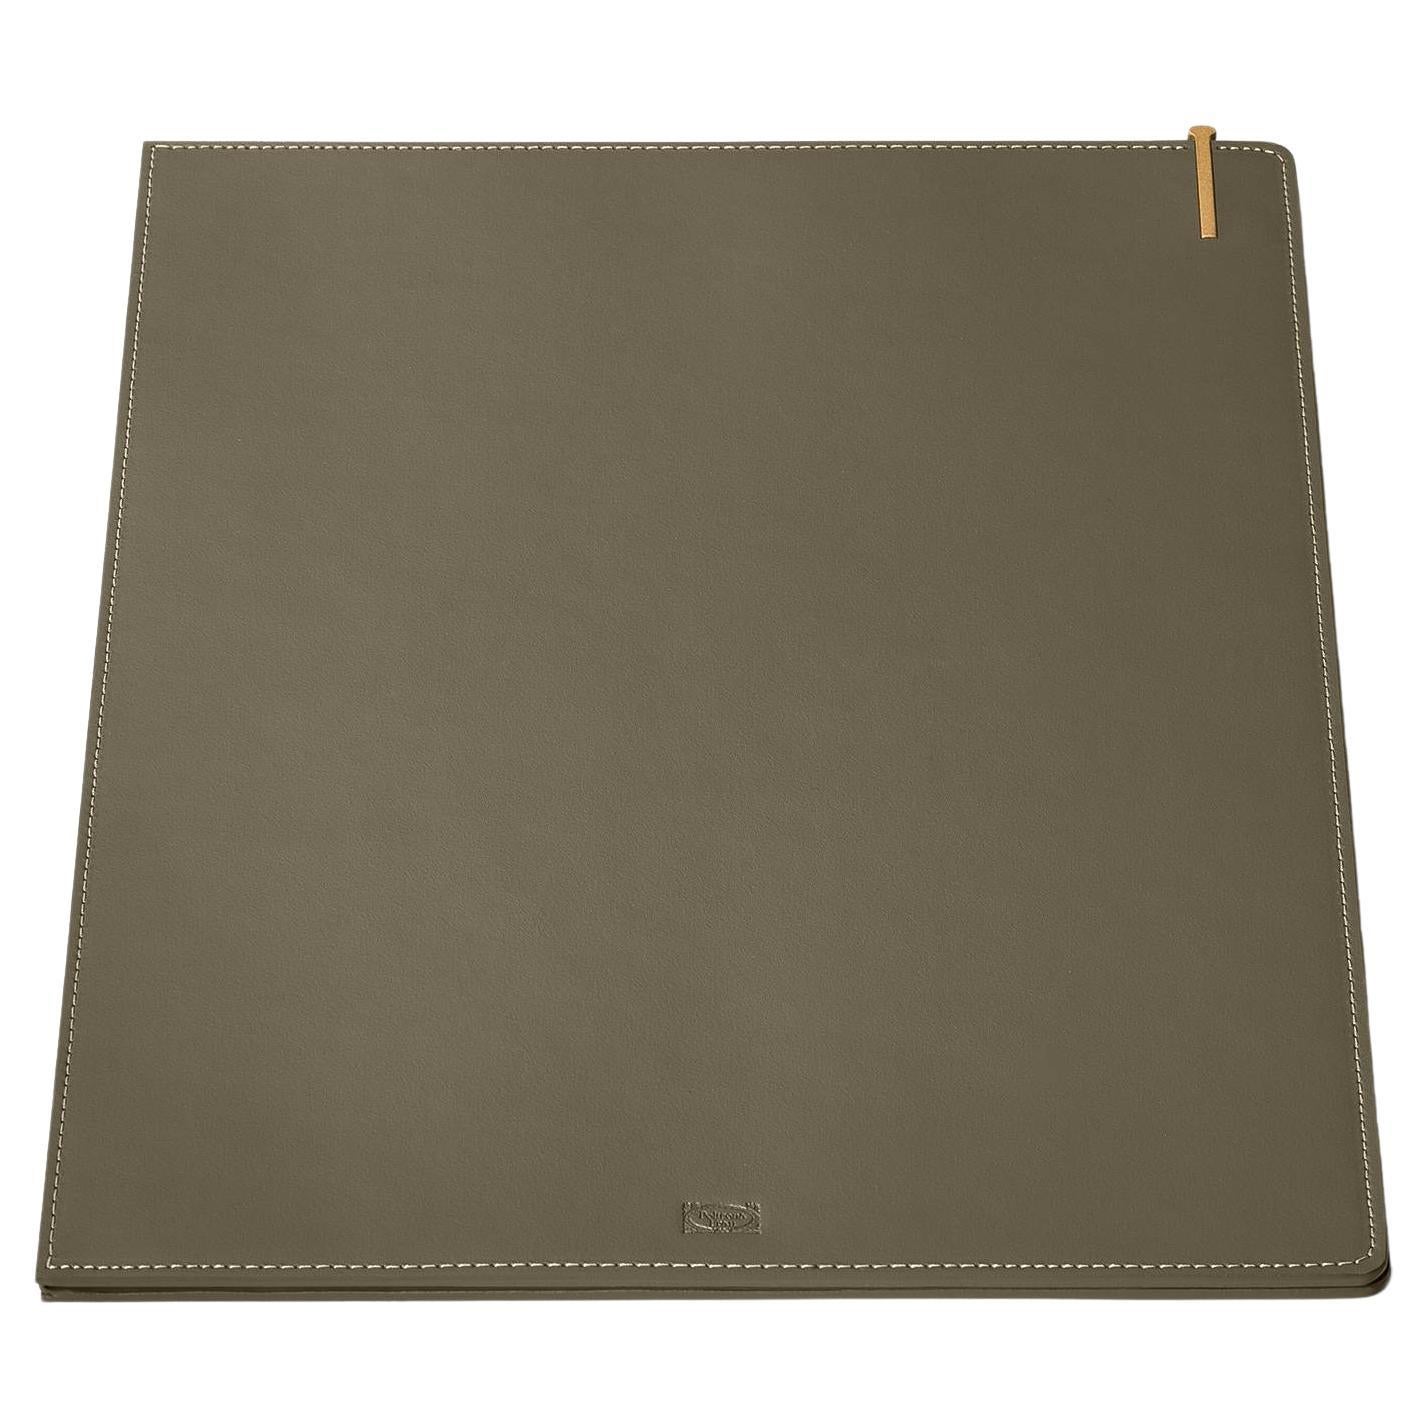 Zhuang Desk, Working Pad in Saddle Leather Tortora Colour For Sale